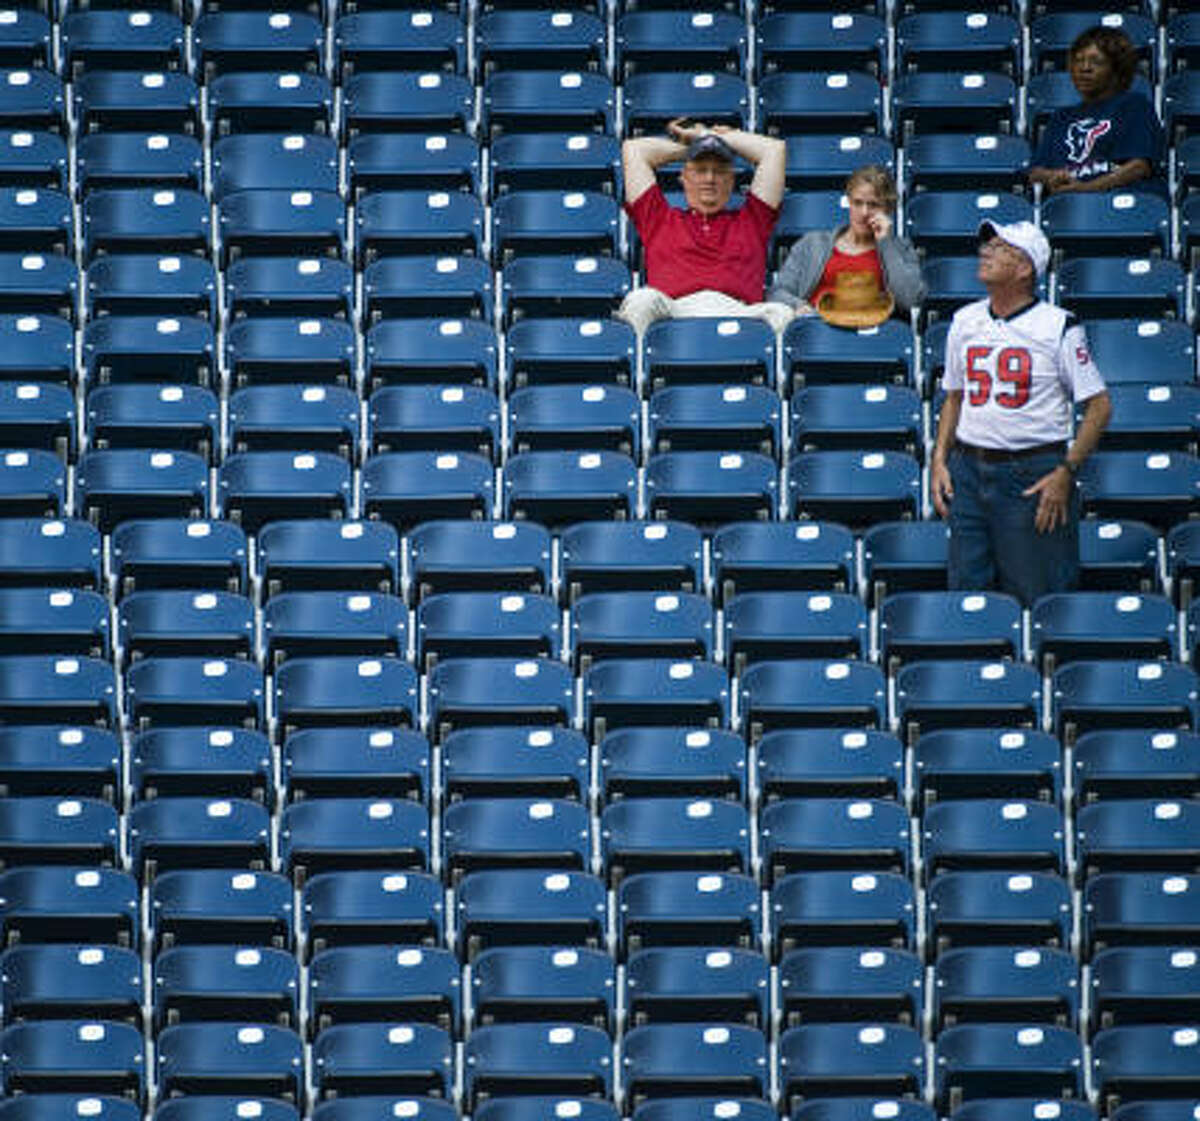 A few loyal fans stick it out in the fourth quarter of the loss to the Ravens.